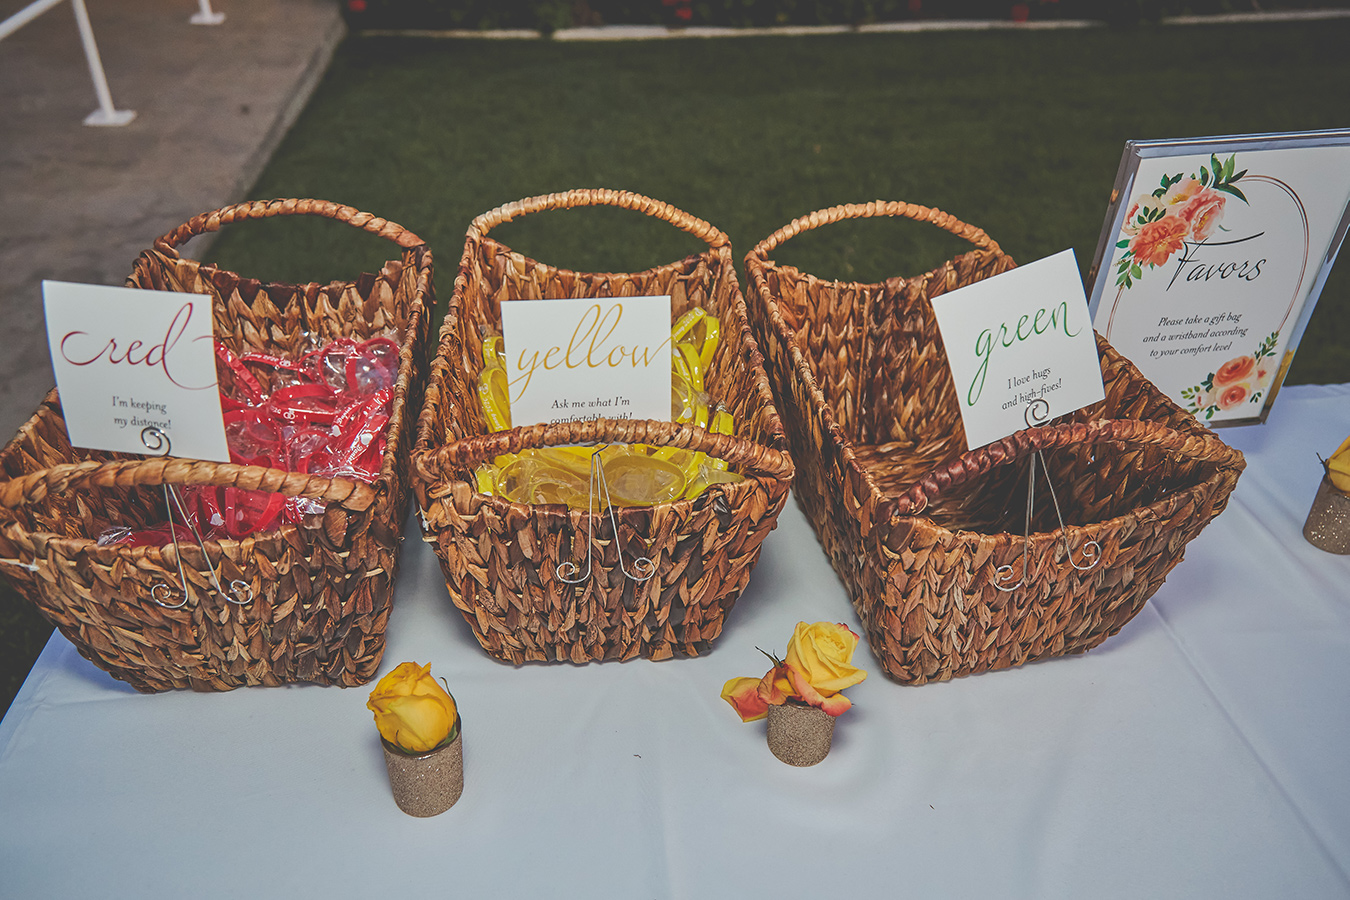 baskets on a table with signs indicating their colors